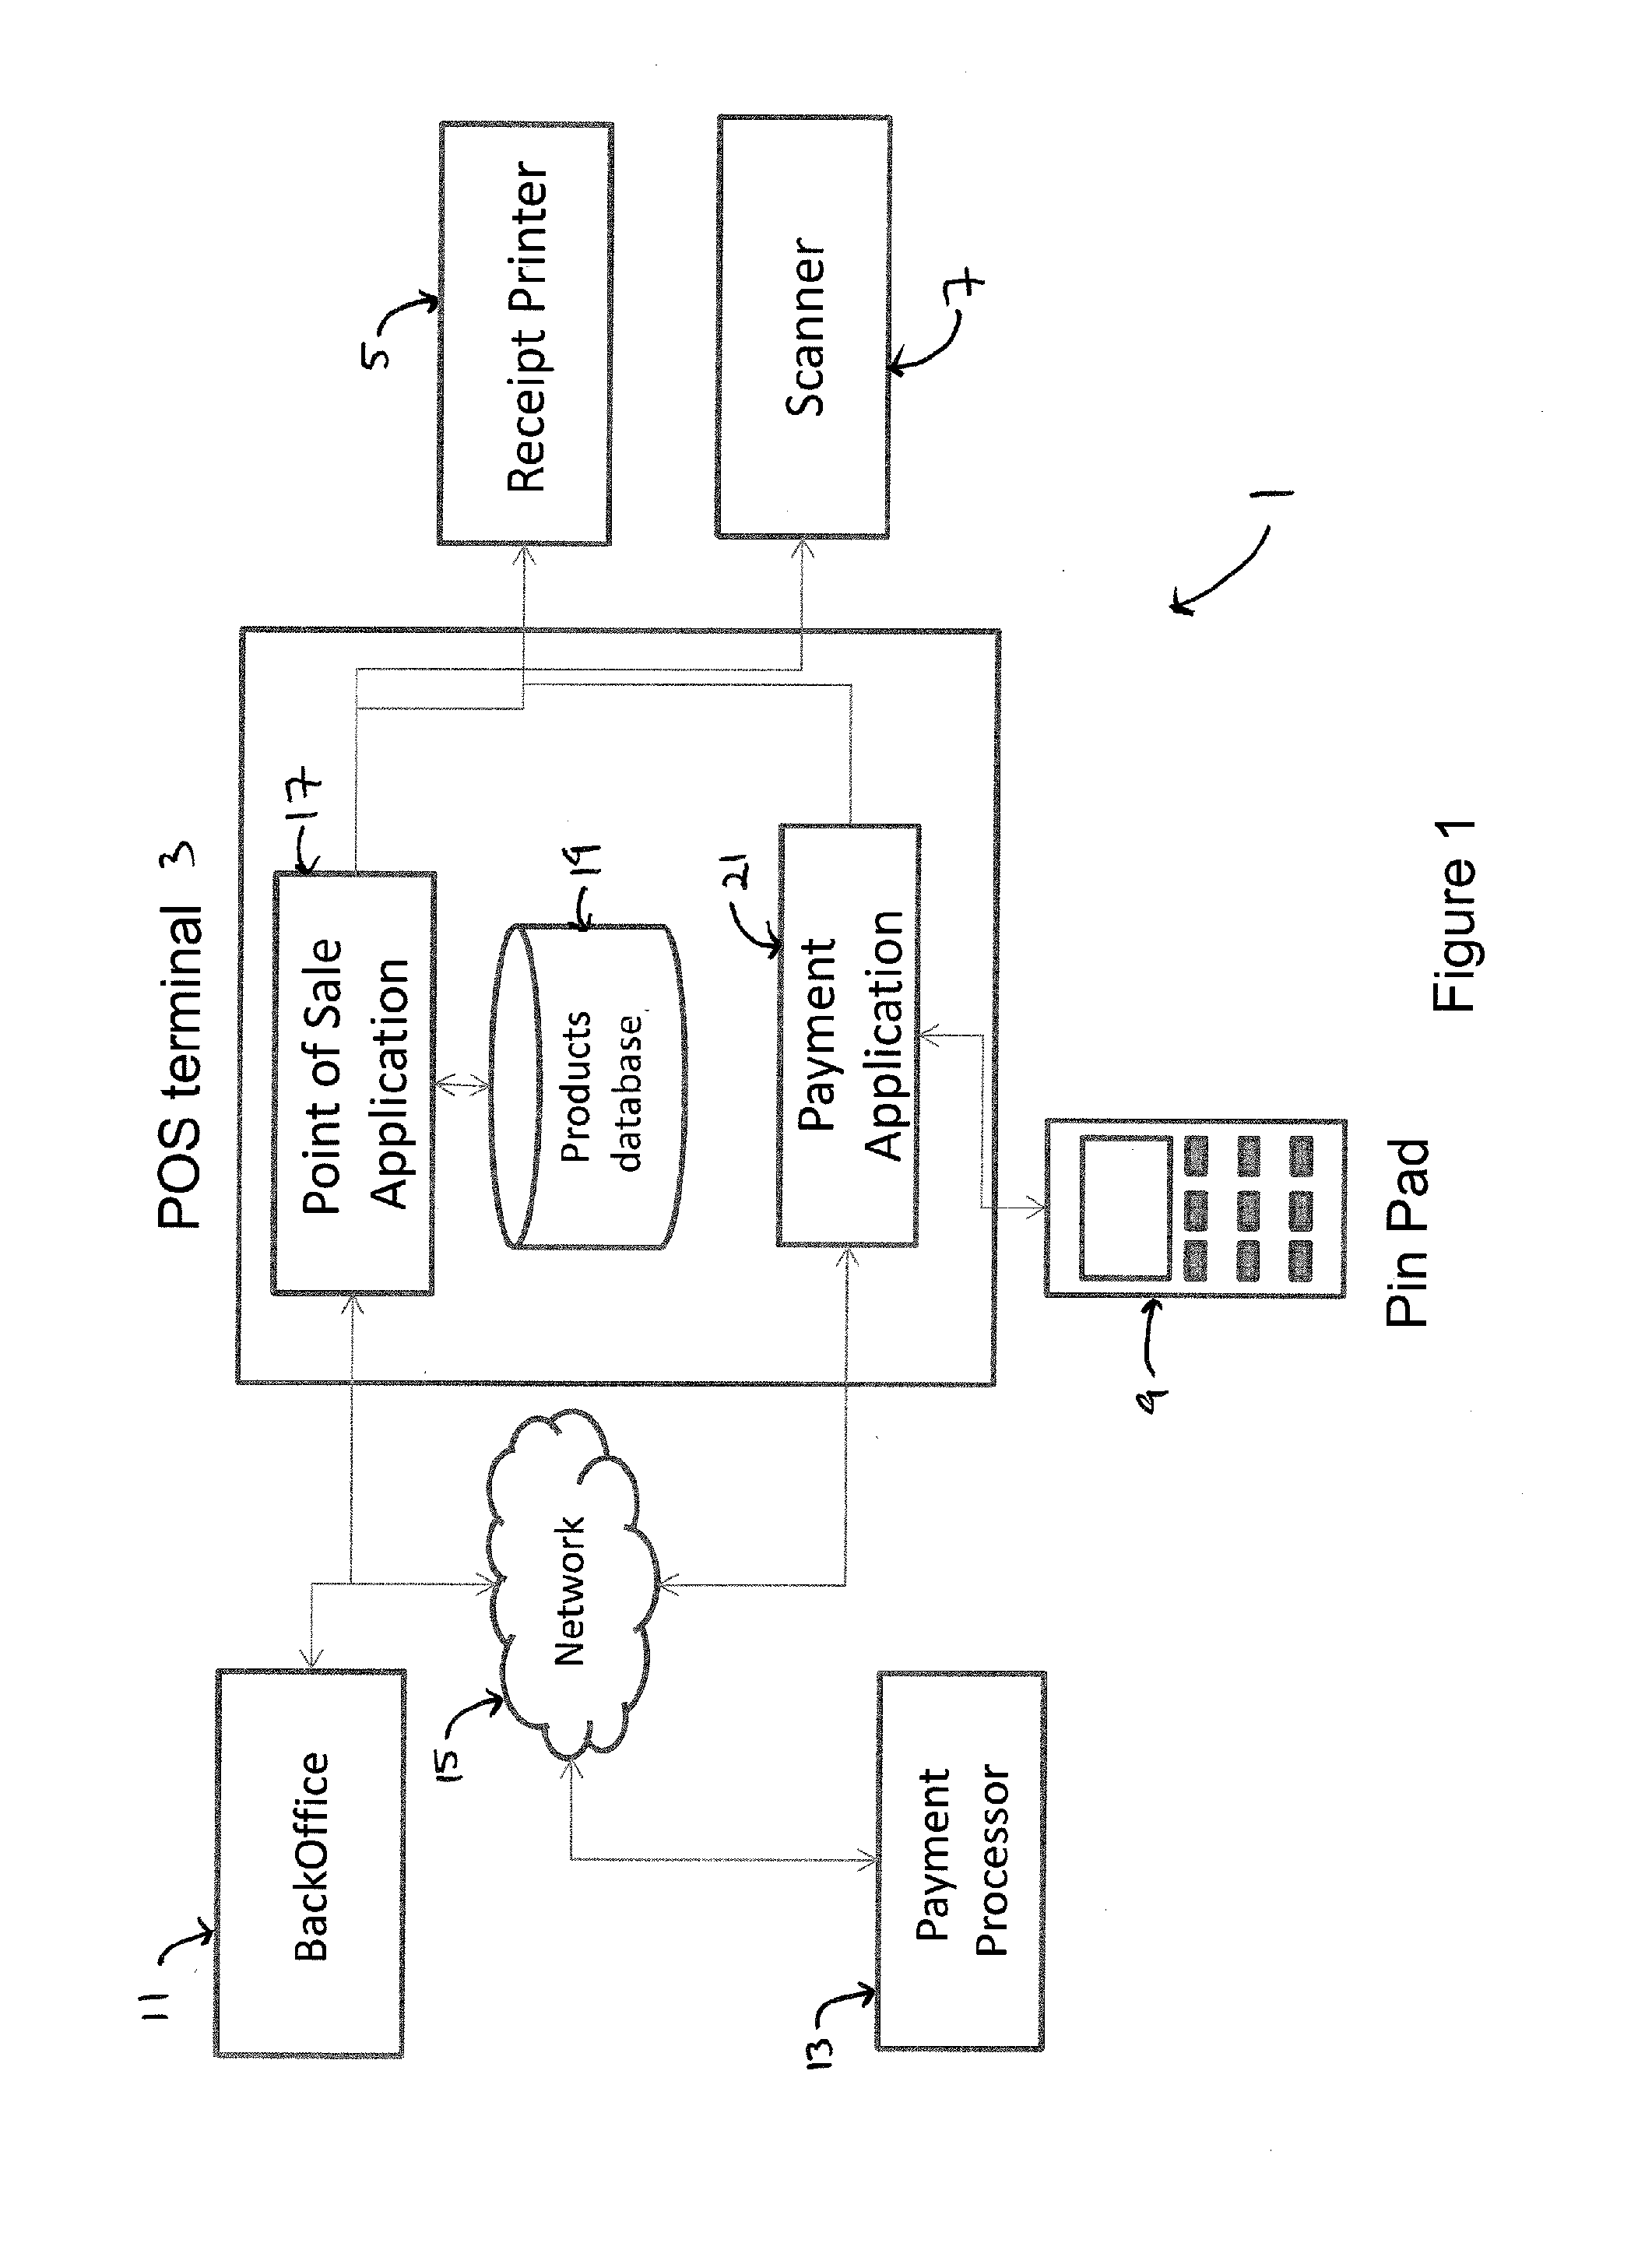 Method of enhancing point-of-sale systems